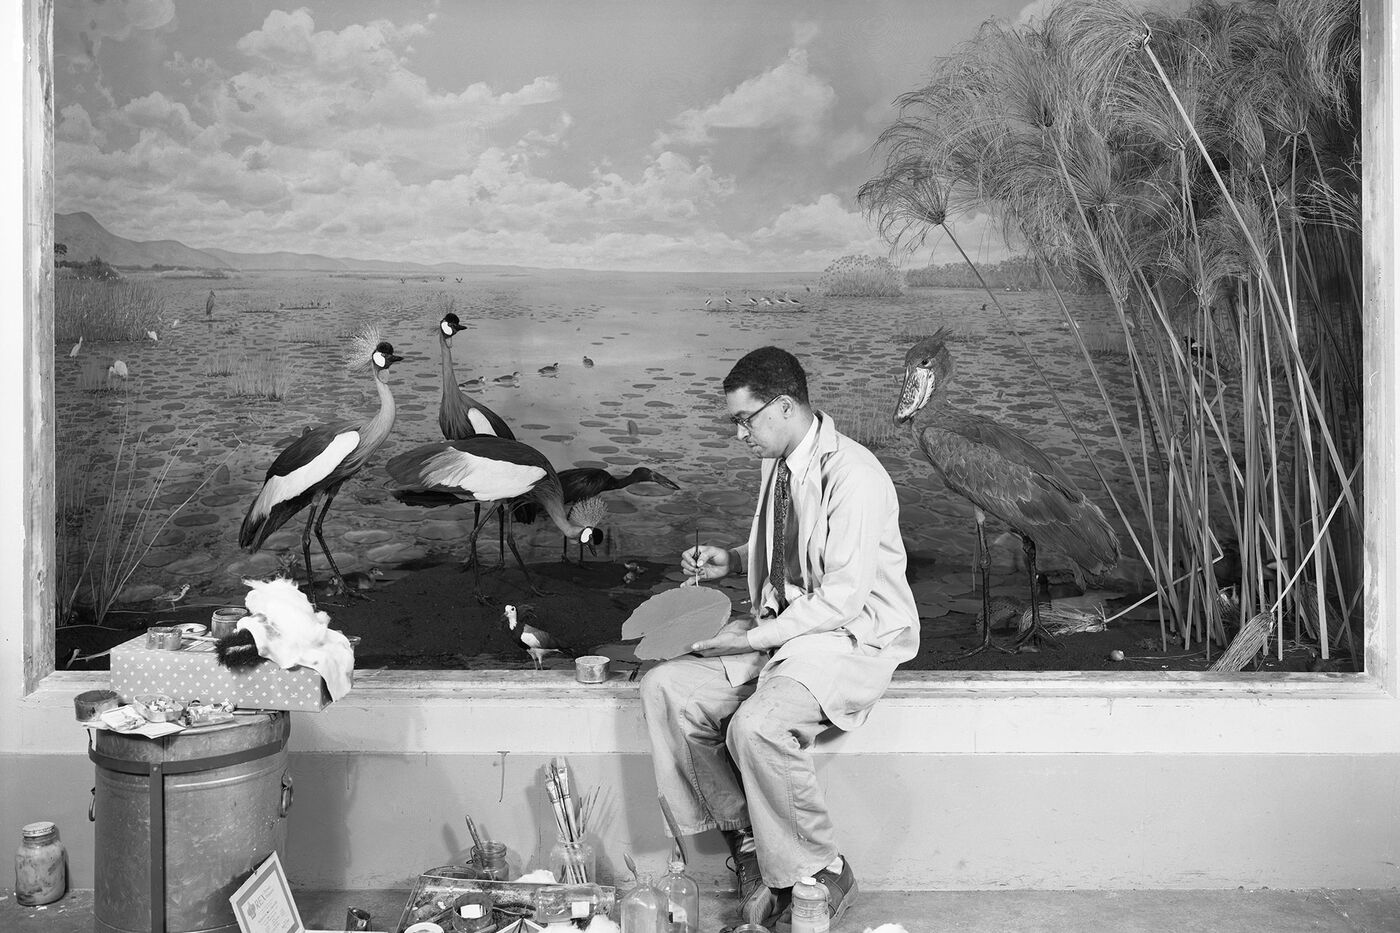 Cotton at work on the Nile marsh diorama in 1953. In addition to preparing every bird, he also replicated each lily pad by hand, bringing the East African habitat to life.